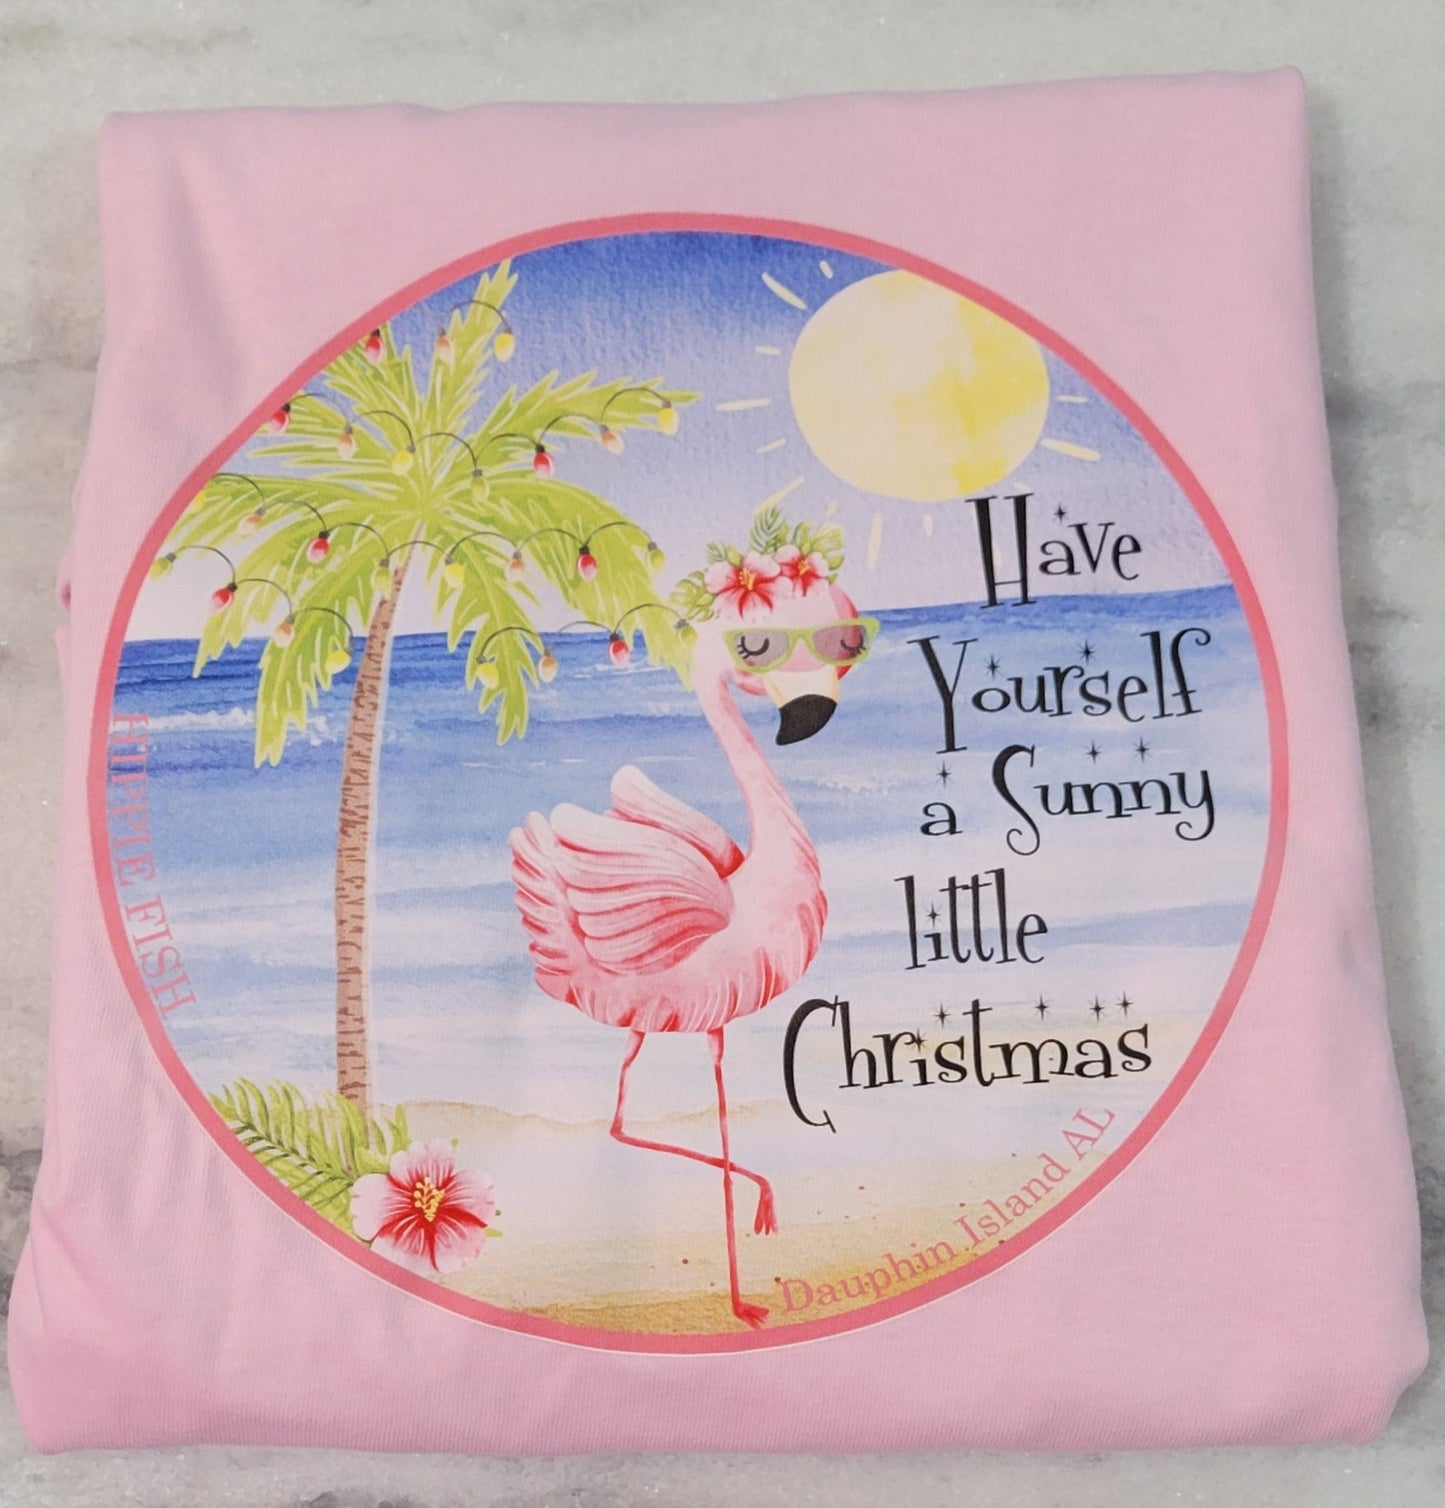 HAVE YOURSELF A SUNNY LITTLE CHRISTMAS L/S T-SHIRT